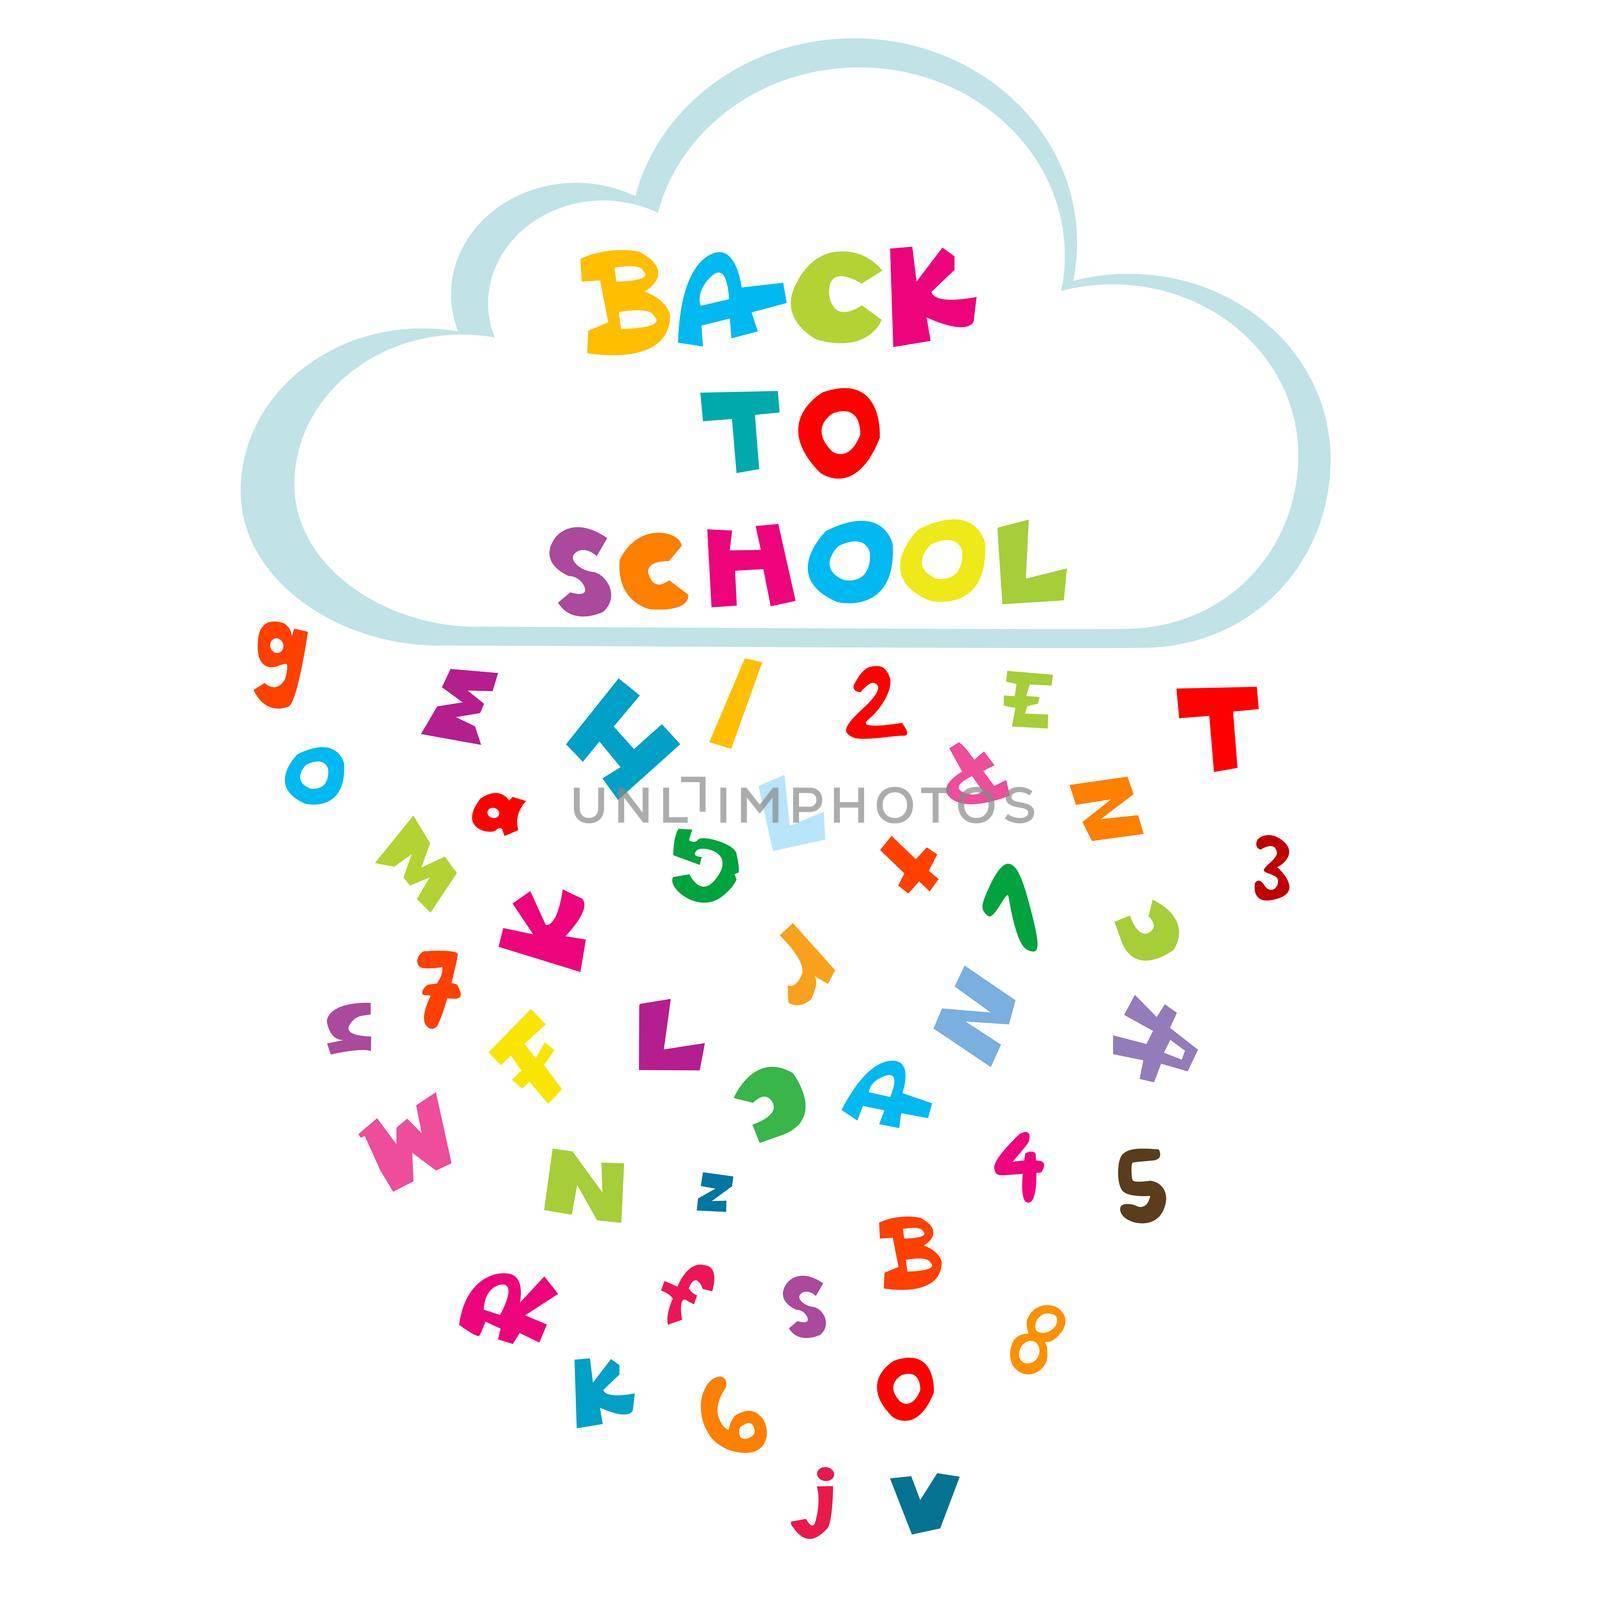 Back to school illustration with cloud and rain made of letters and numbers